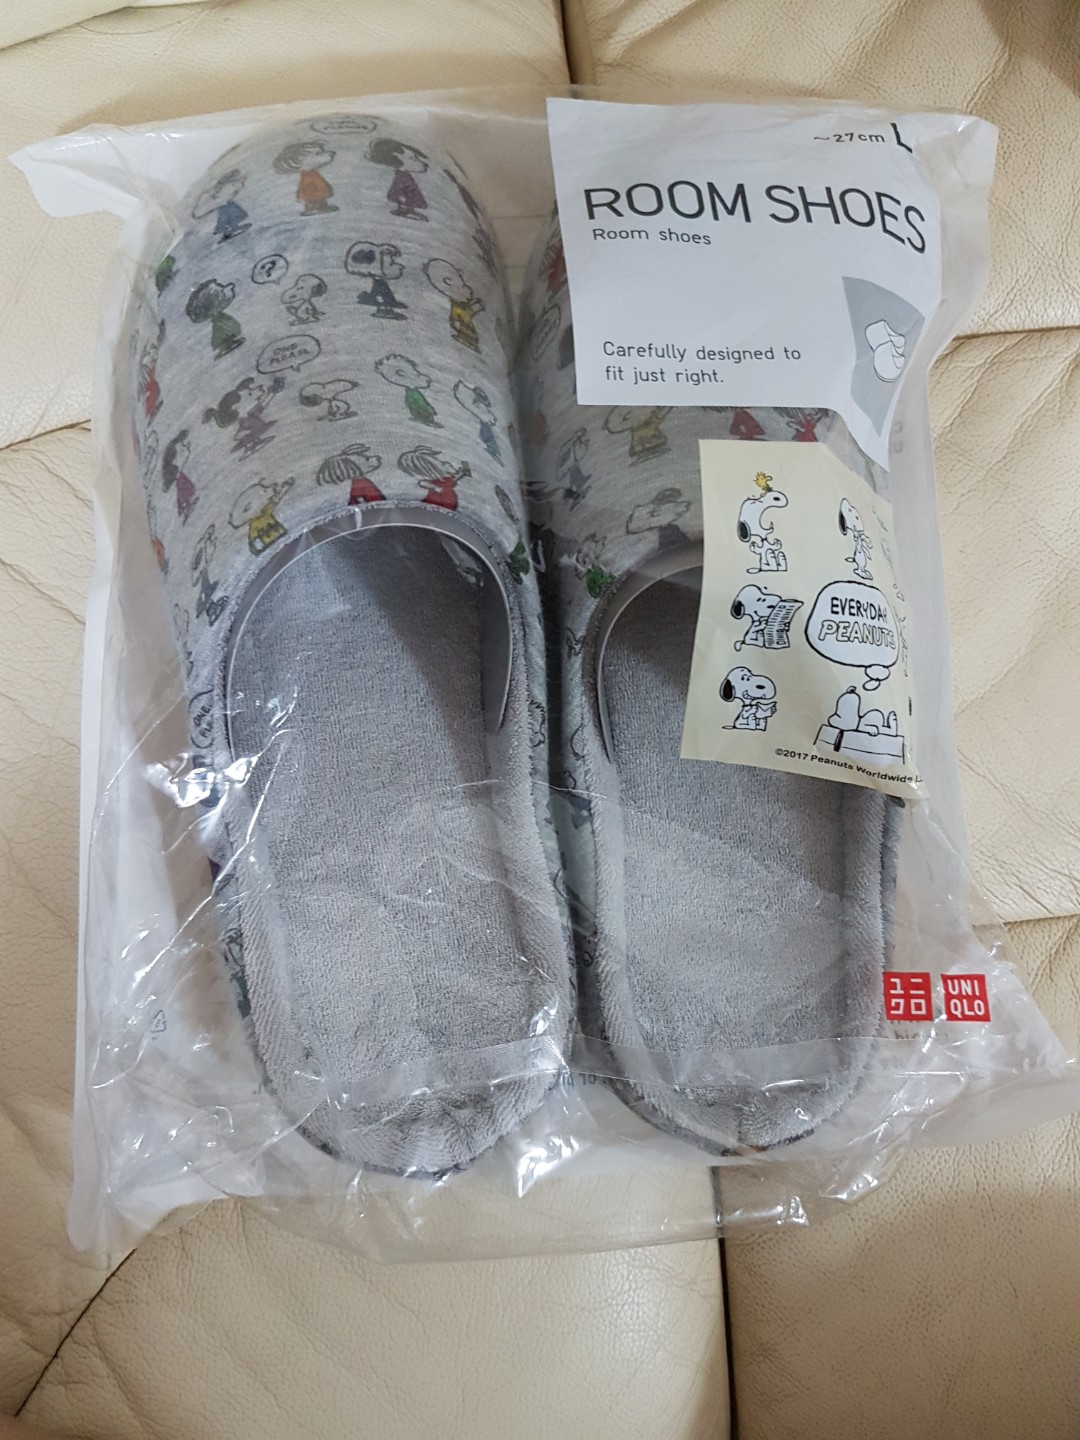 Uniqlo Snoopy Peanuts Bedroom Shoes Slippers Men S